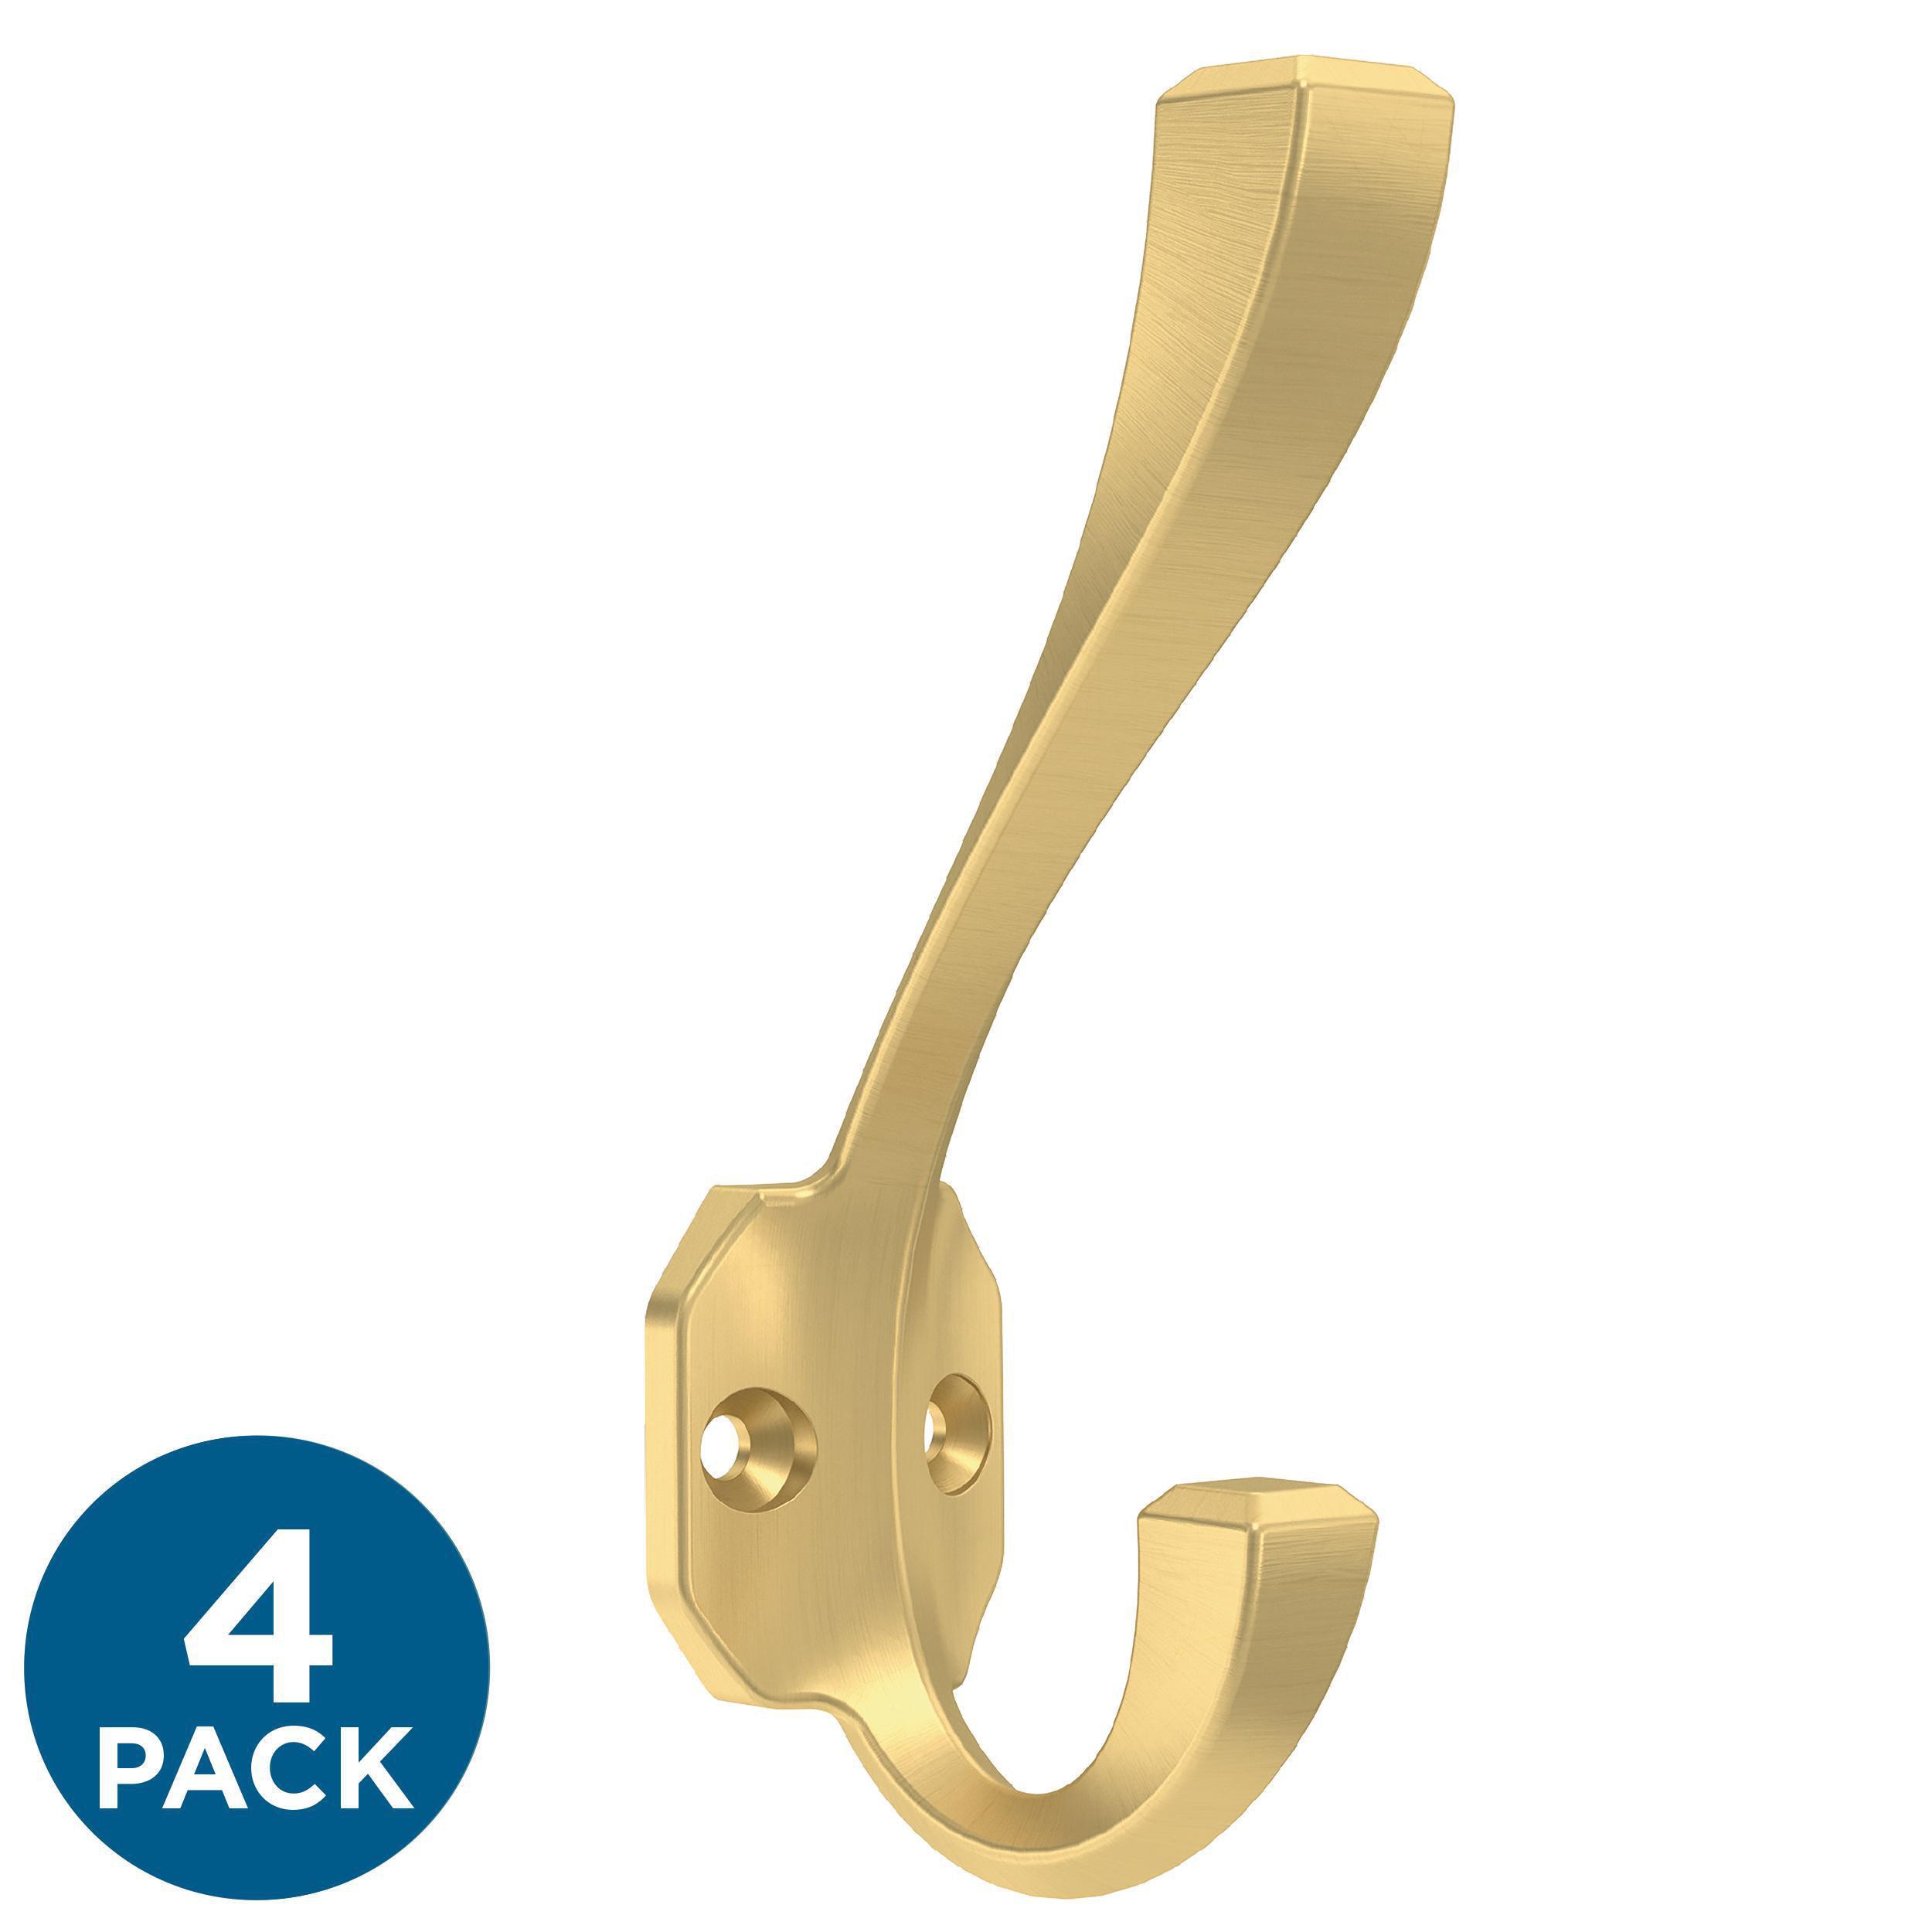 Franklin Brass 27 In. Hook Rail W/6 Heavy Duty Coat And Hat Hooks,  Lacquered Pine & Brass Plated